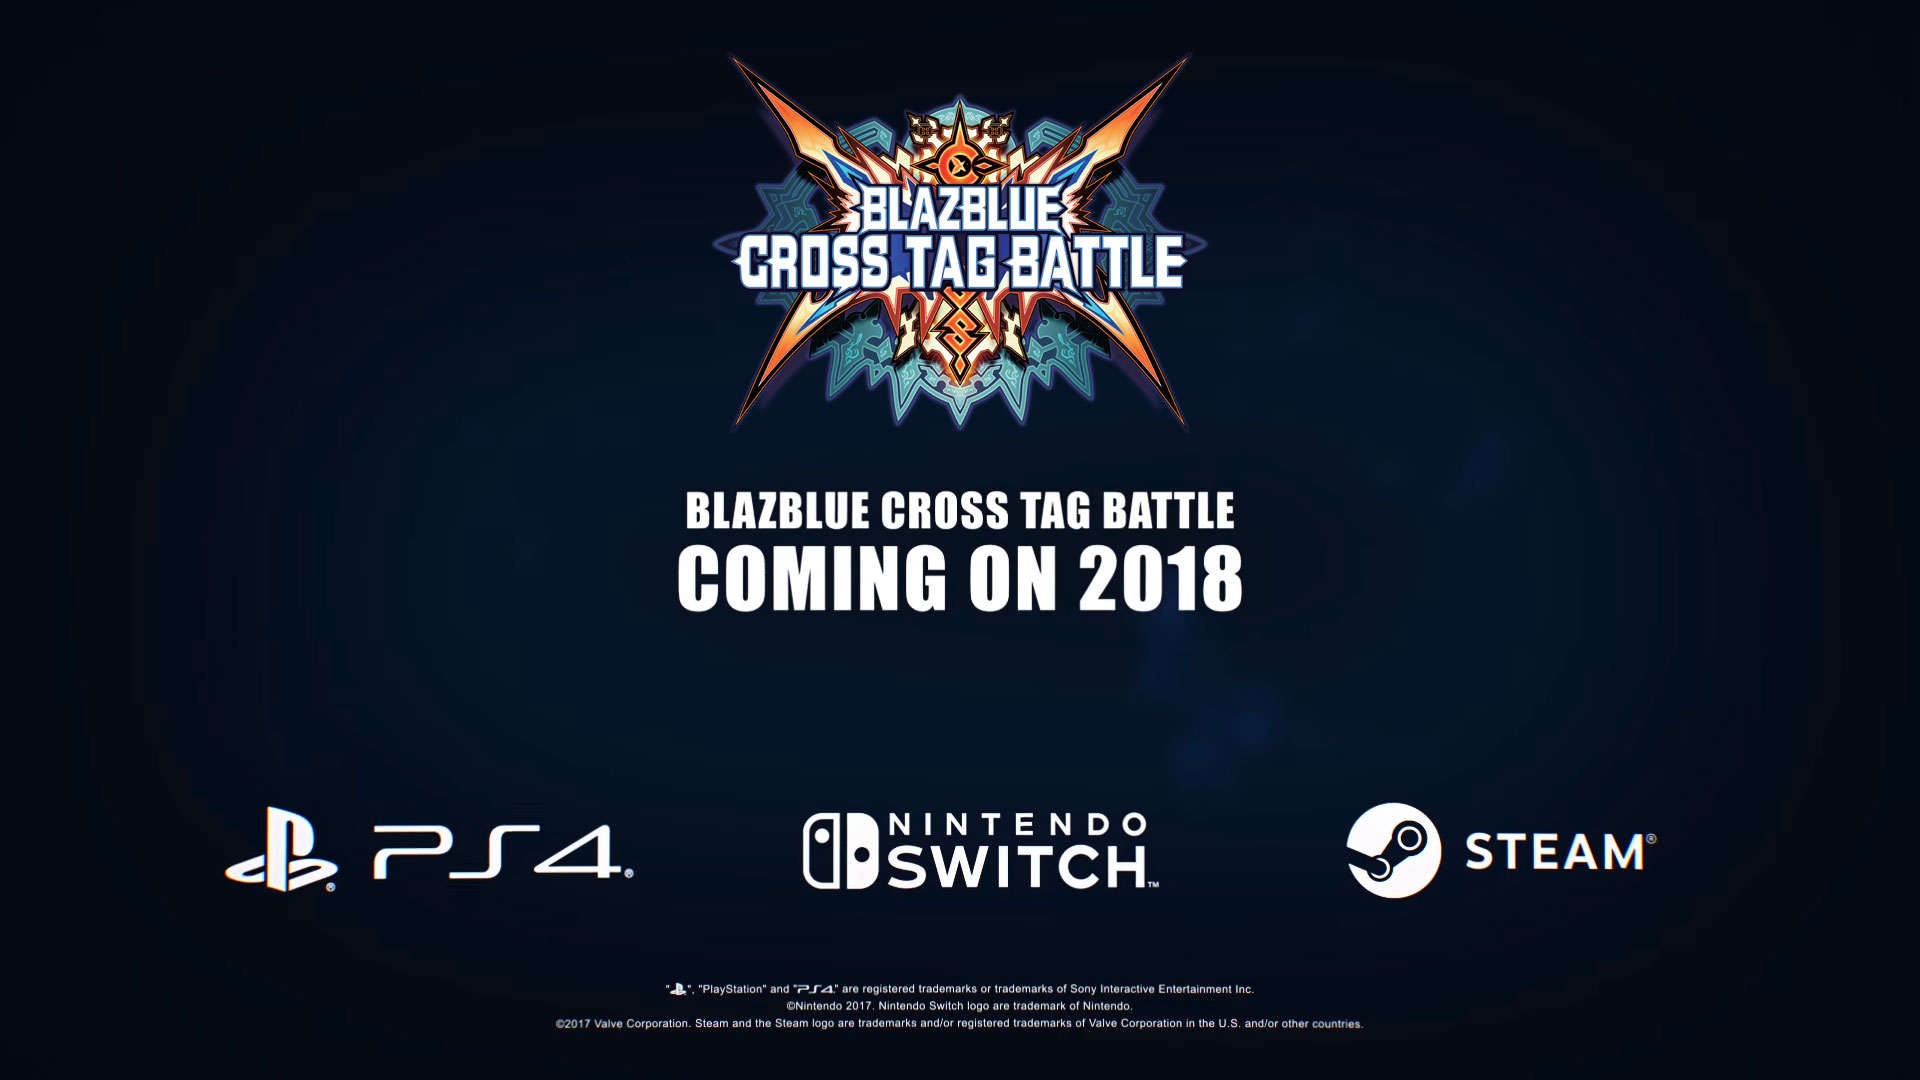 BLAZBLUE CROSS TAG BATTLE To Be Released for PlayStation 4, Nintendo Switch, and Steam!